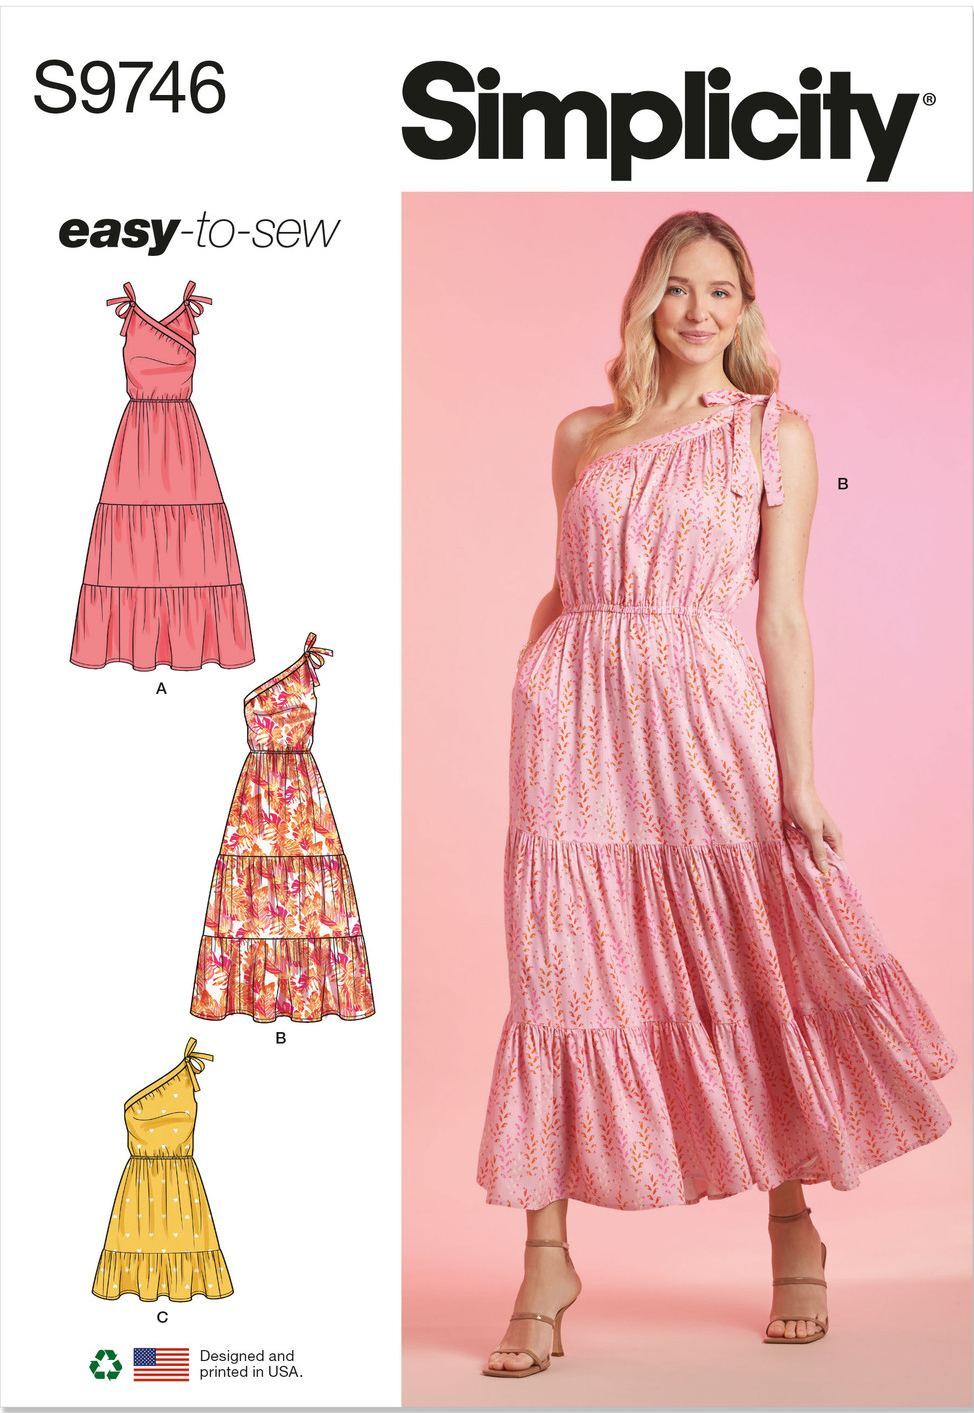 Simplicity Sewing Pattern S9746H5 Misses' Dresses Sizes 6-14